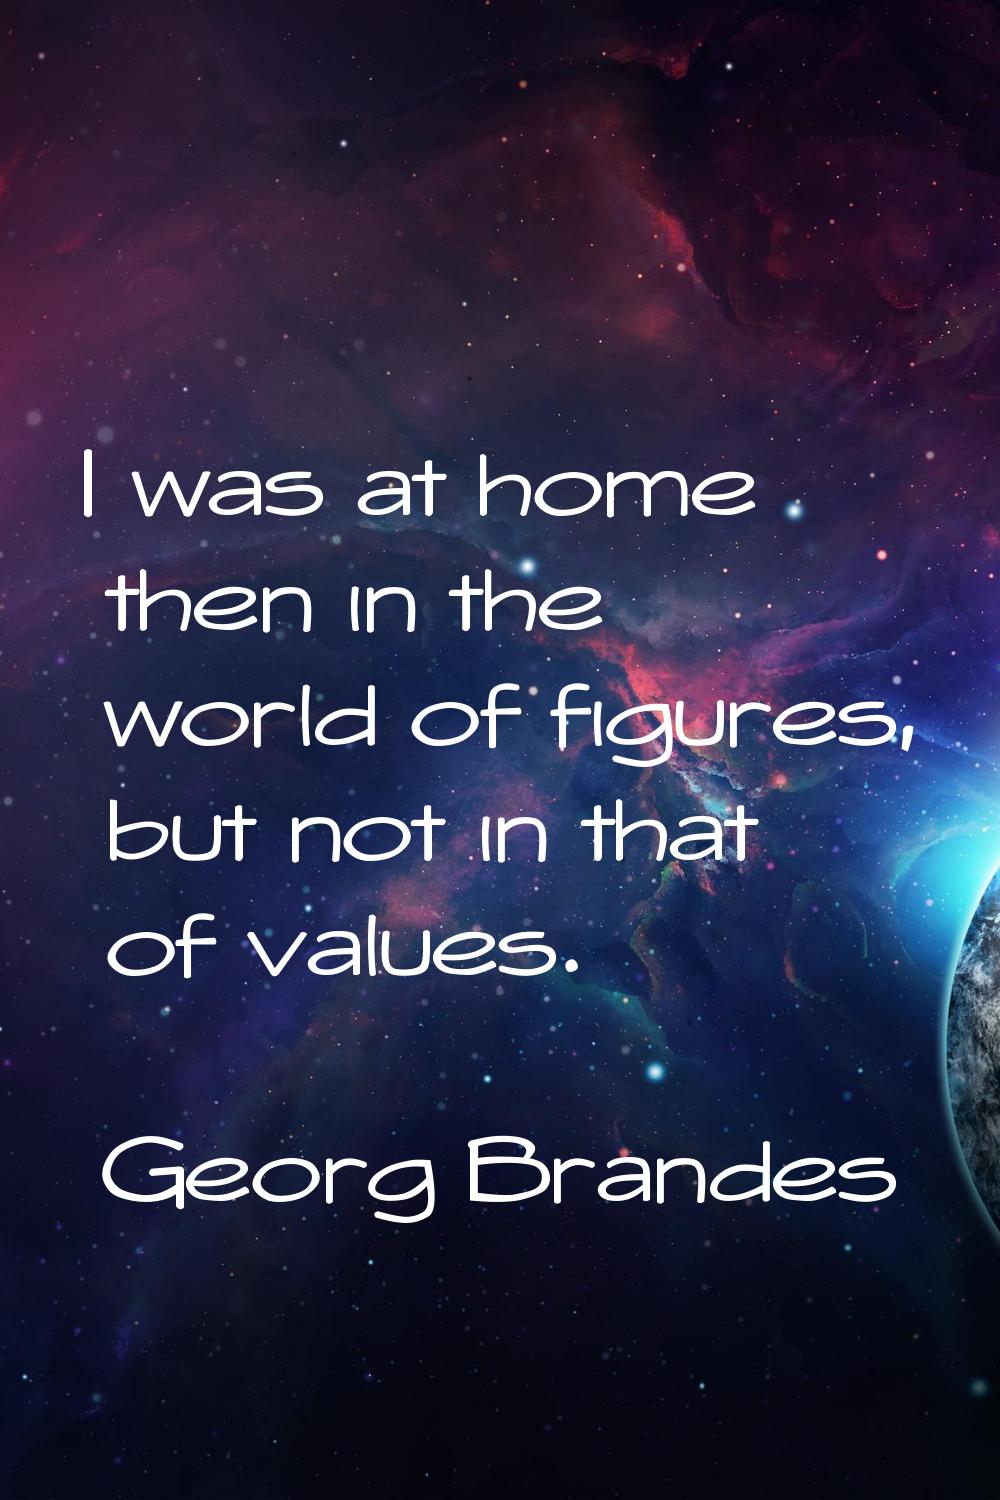 I was at home then in the world of figures, but not in that of values.